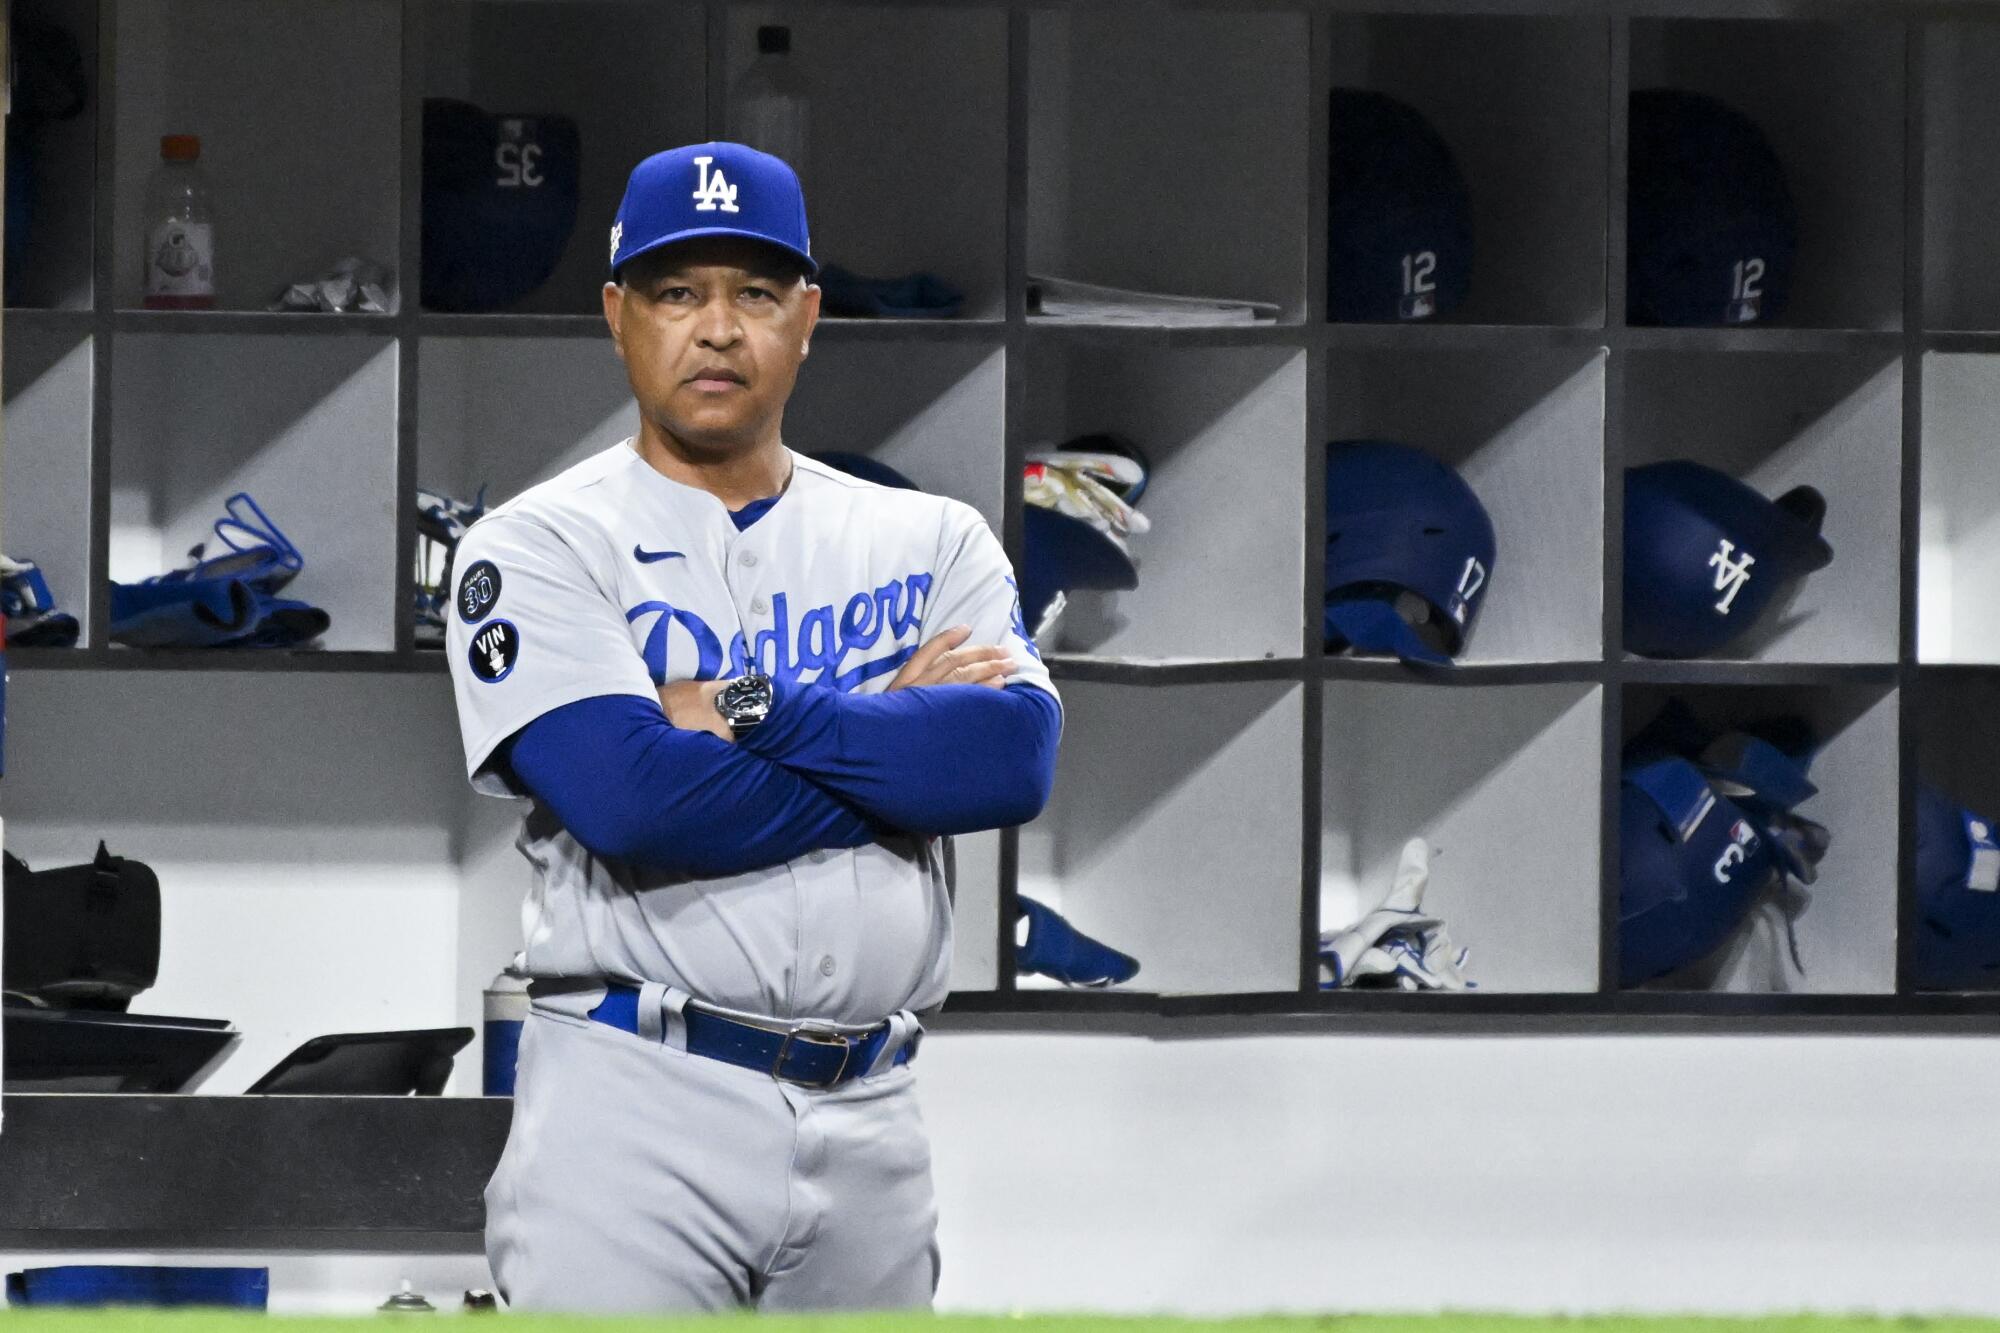 Dodgers manager Dave Roberts watches from the dugout during Game 3 of the NLDS against the San Diego Padres in October.